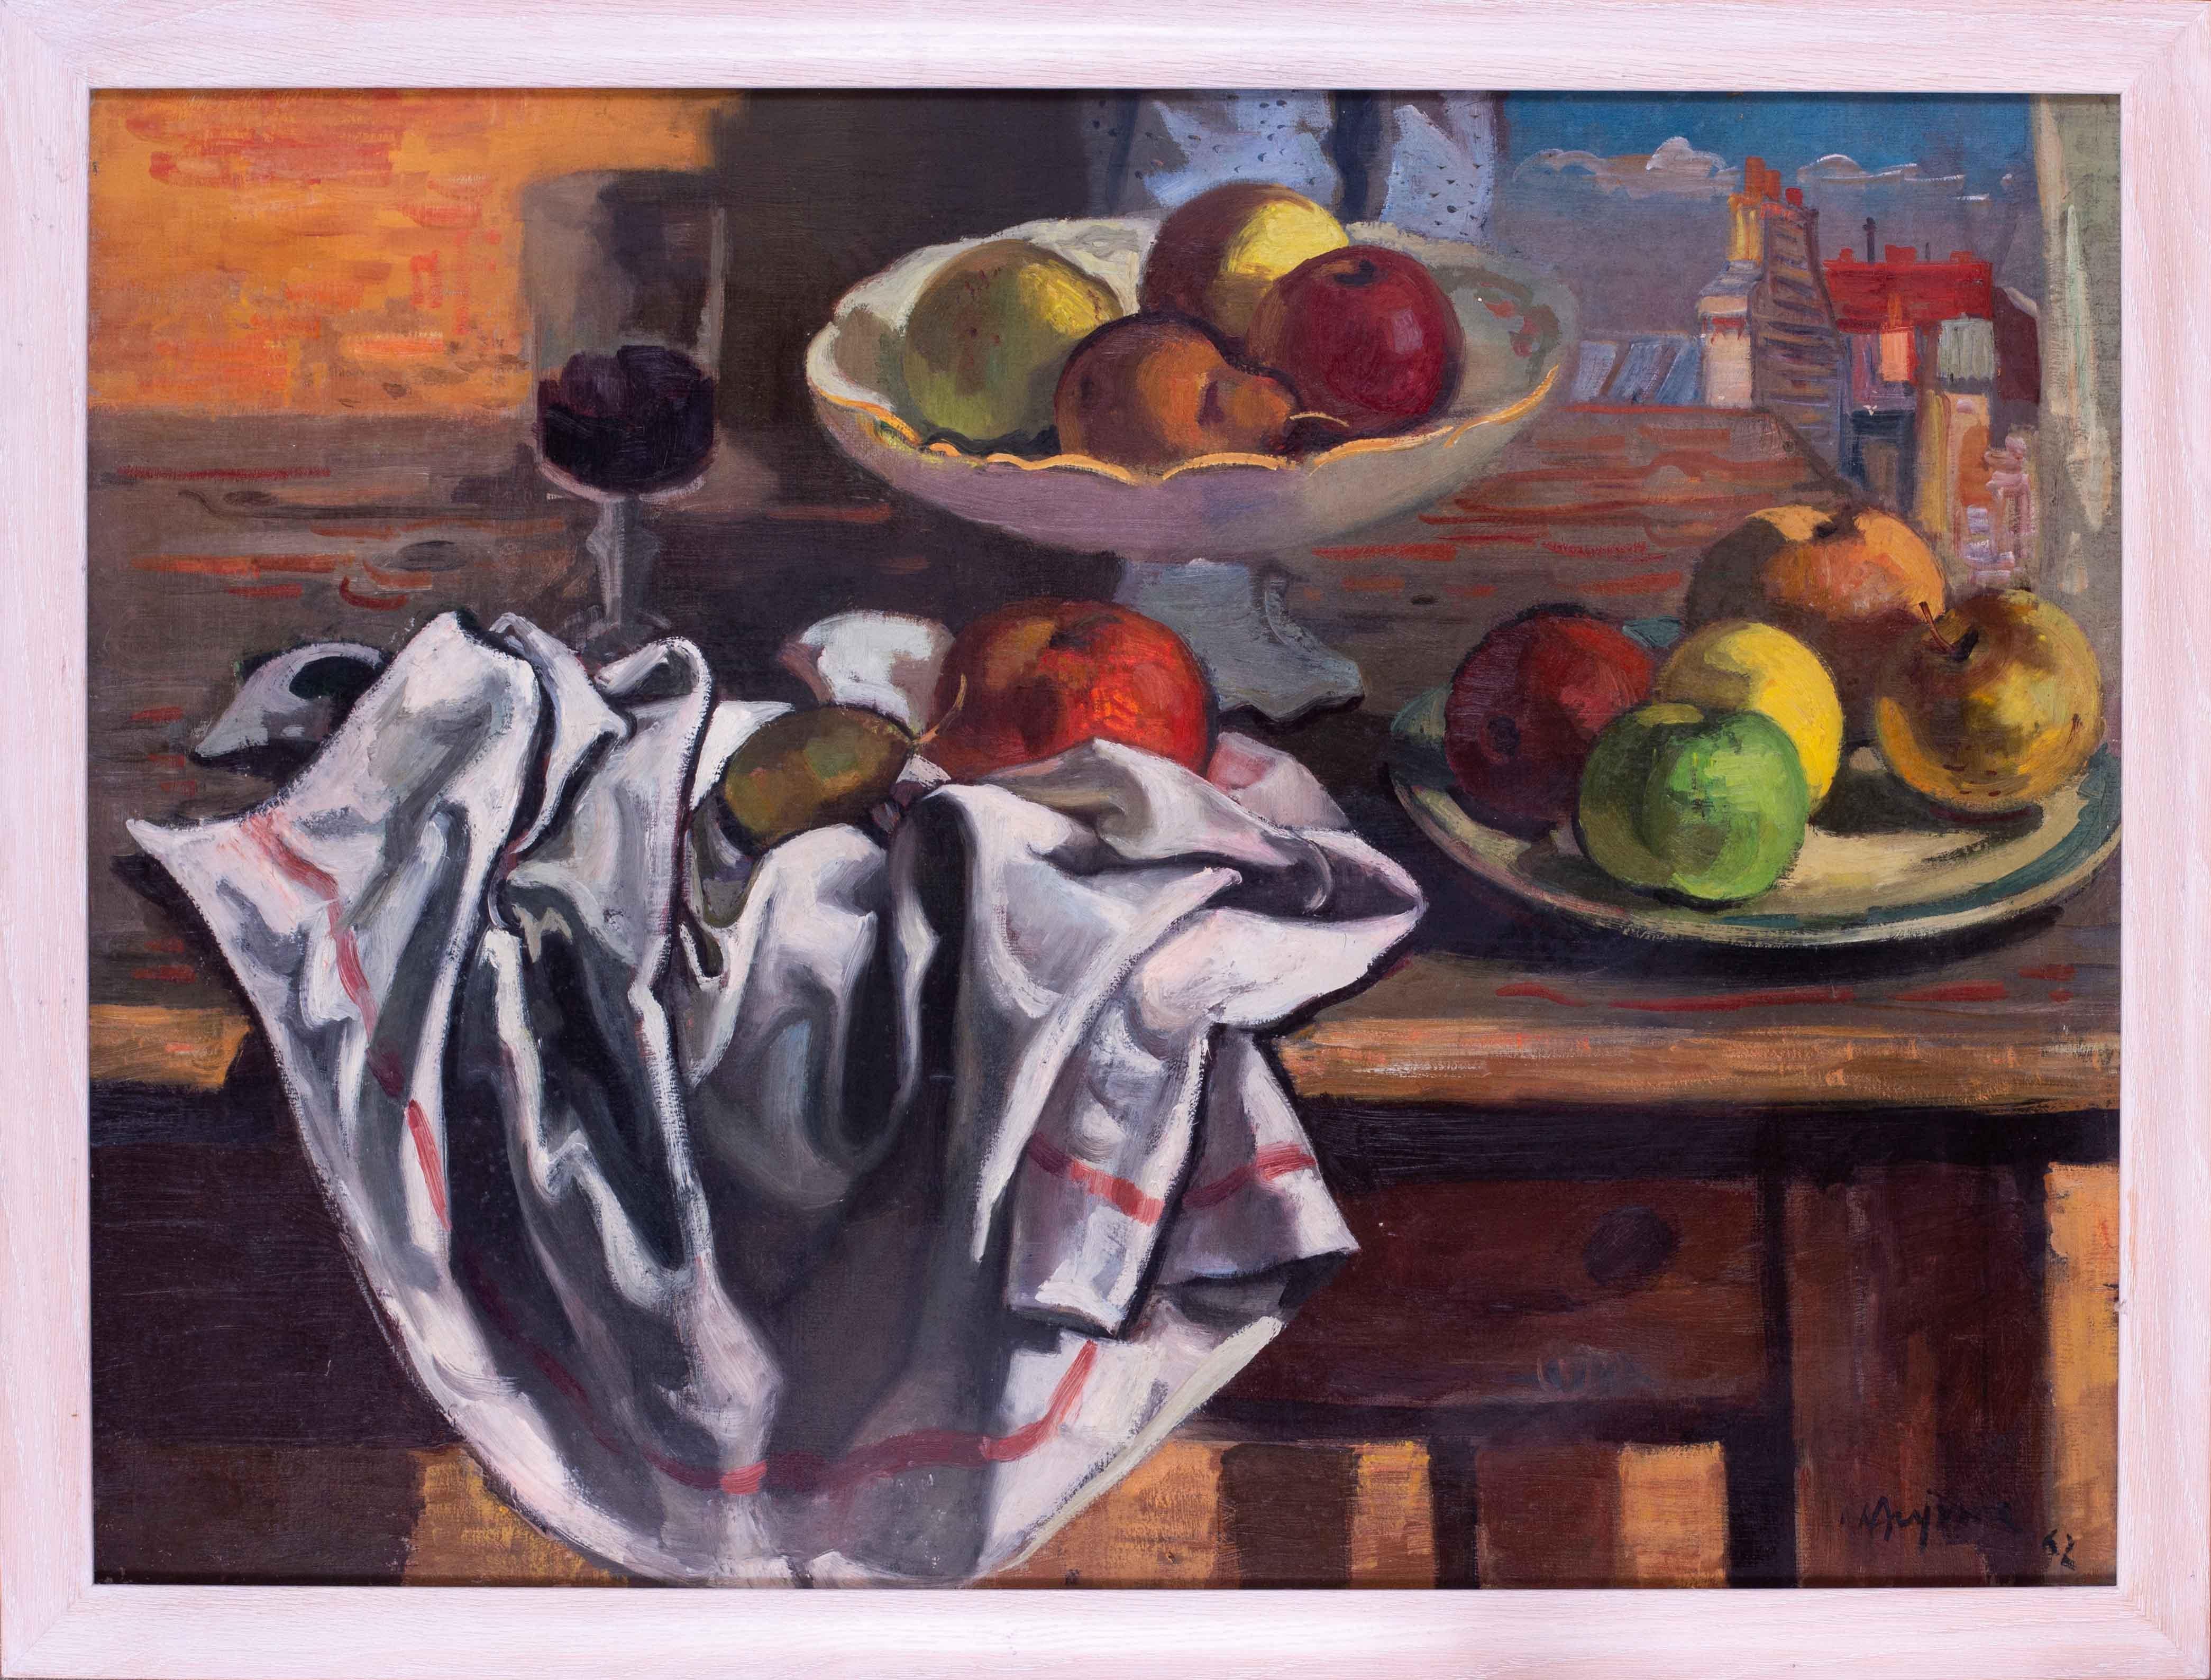 20th Century French Post Impressionist still life with apples by Aujame